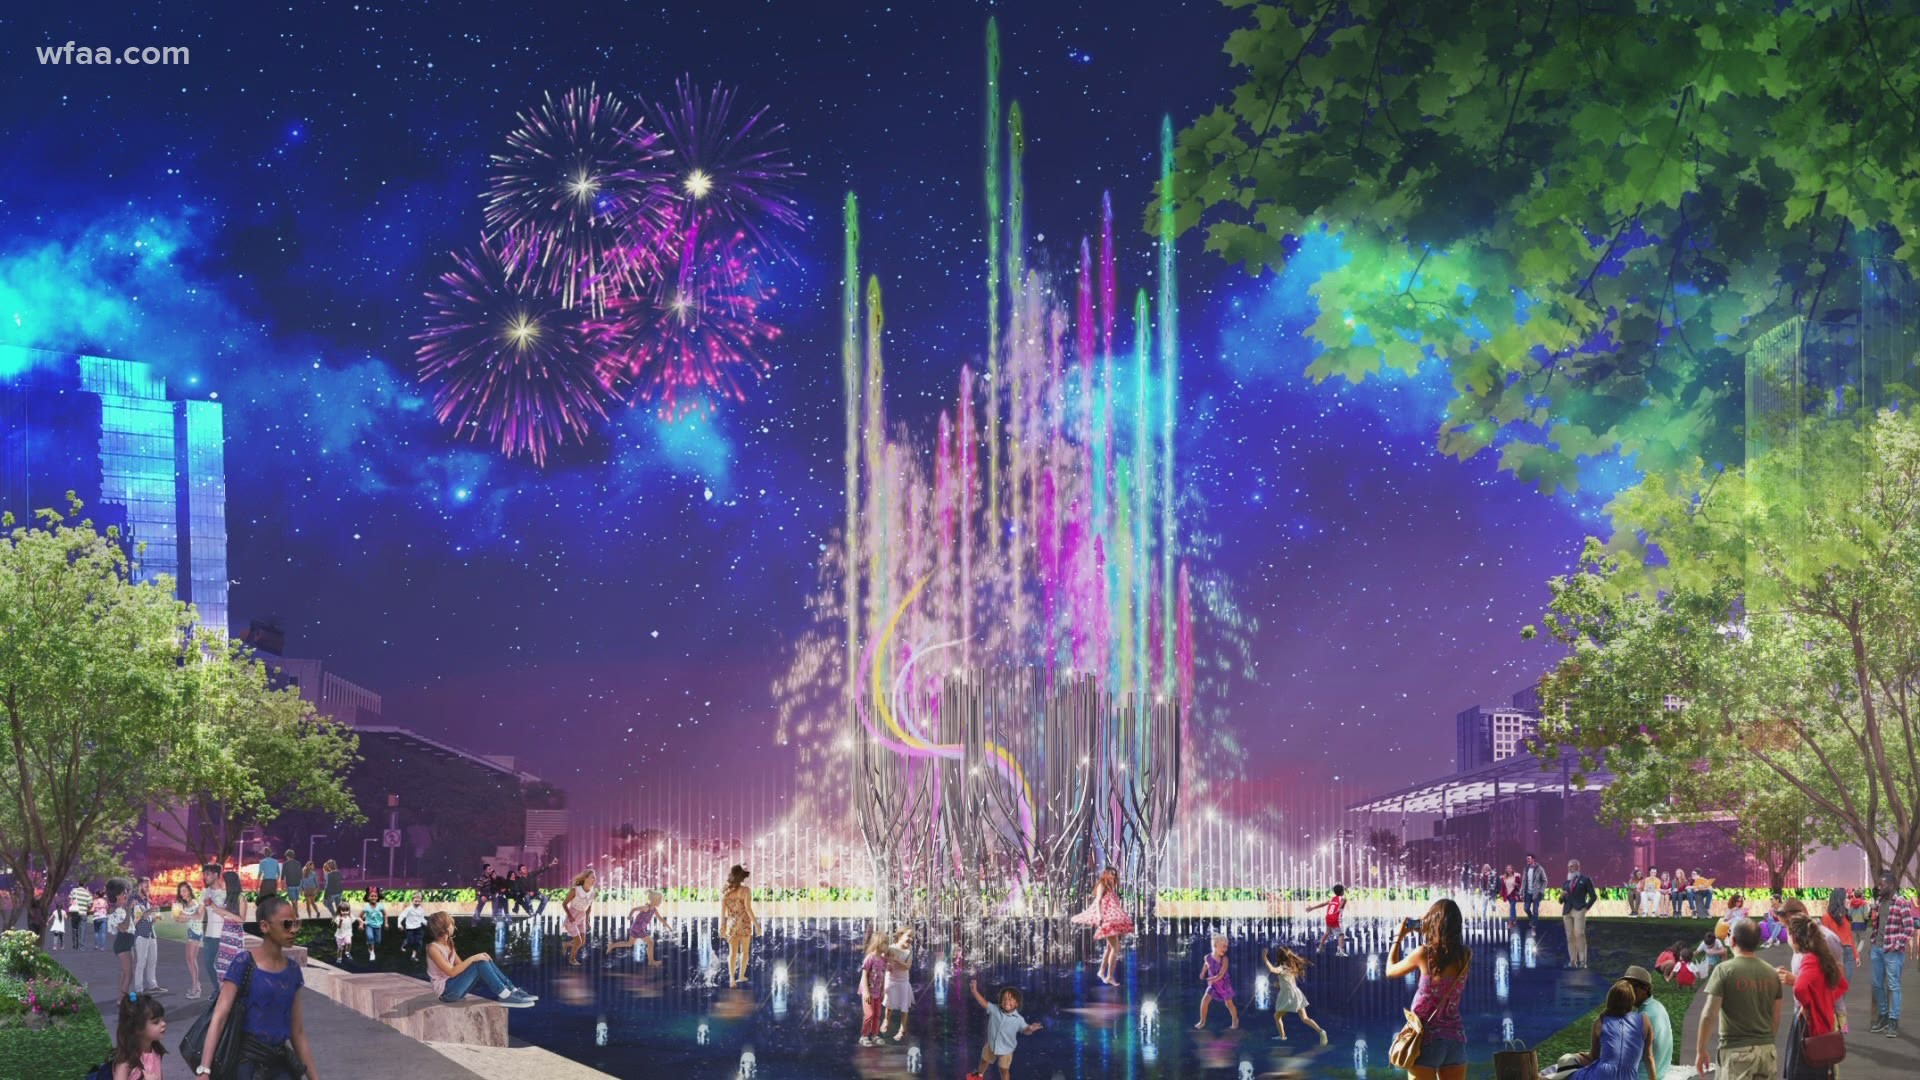 Klyde Warren Park will soon become home to the world's tallest interactive fountain, which is already being described as a future landmark.